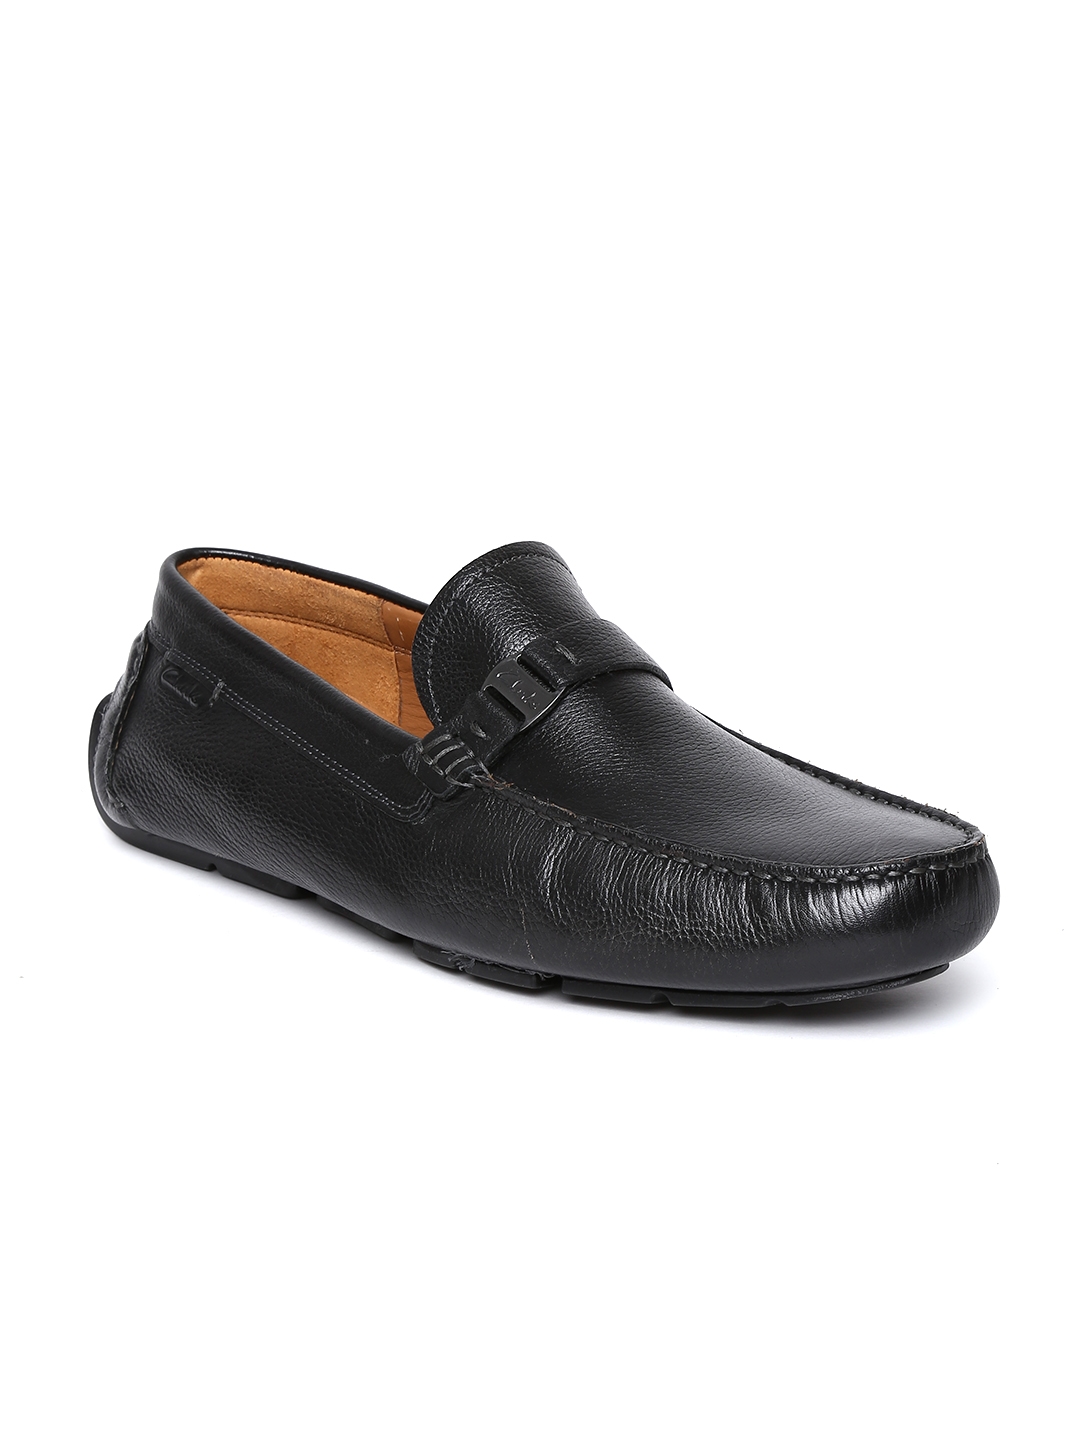 Buy Clarks Men Black Leather Driving Shoes - Casual Shoes for Men 951676 |  Myntra